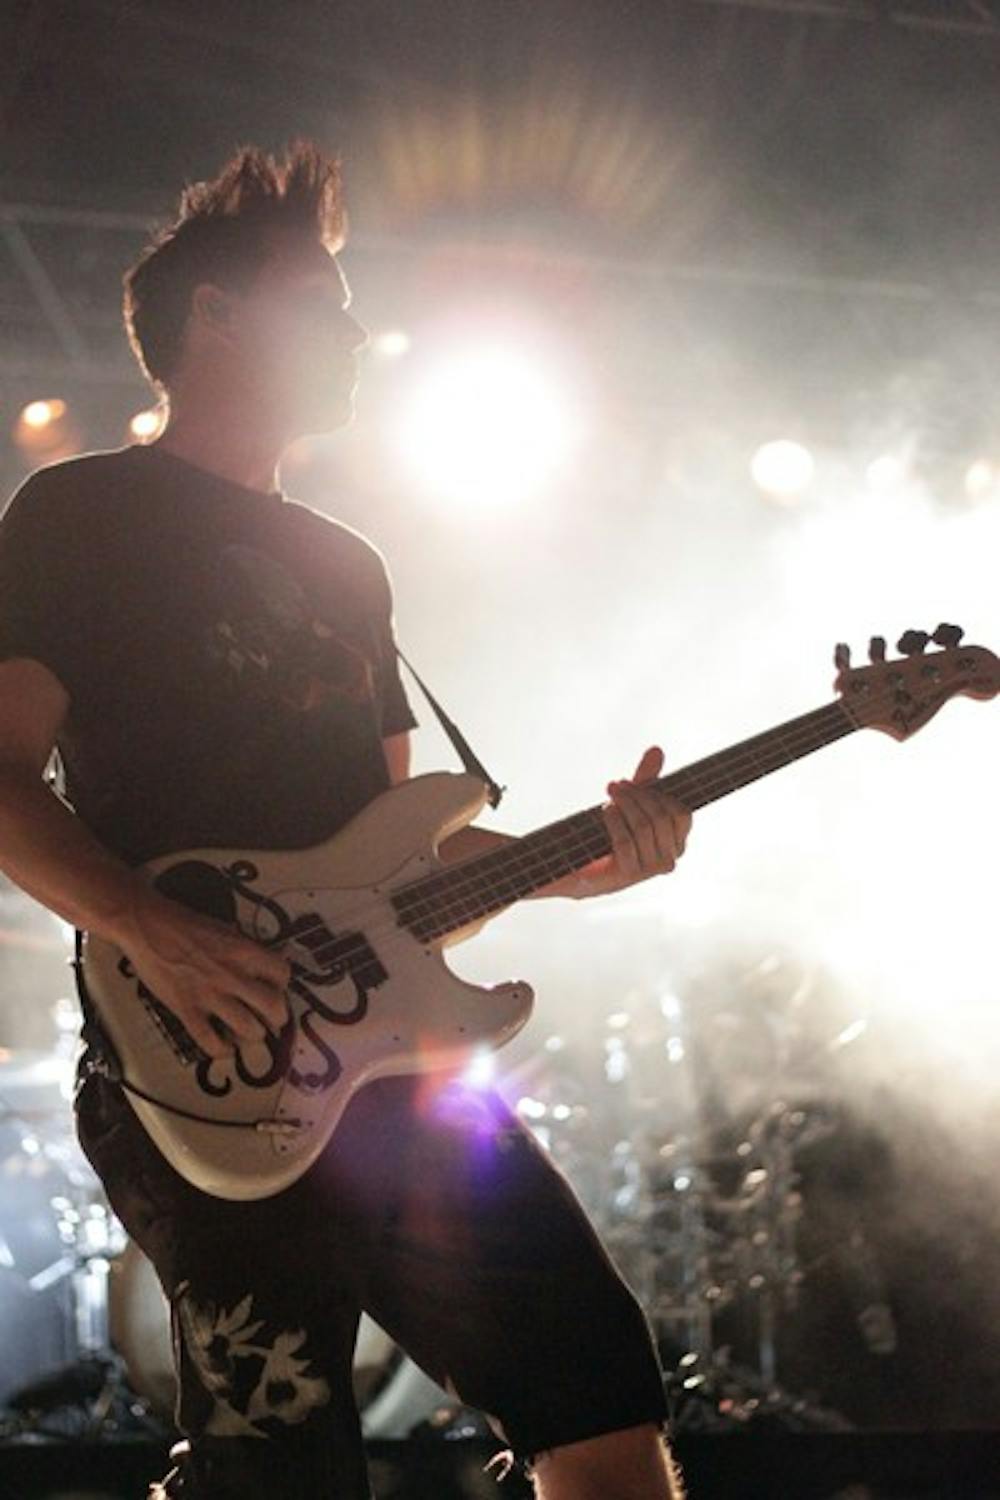 THOSE BRIGHT LIGHTS: Mark Hoppus plays Friday night at Fall Frenzy at the Tempe Beach Park. (Photo by Beth Easterbrook)